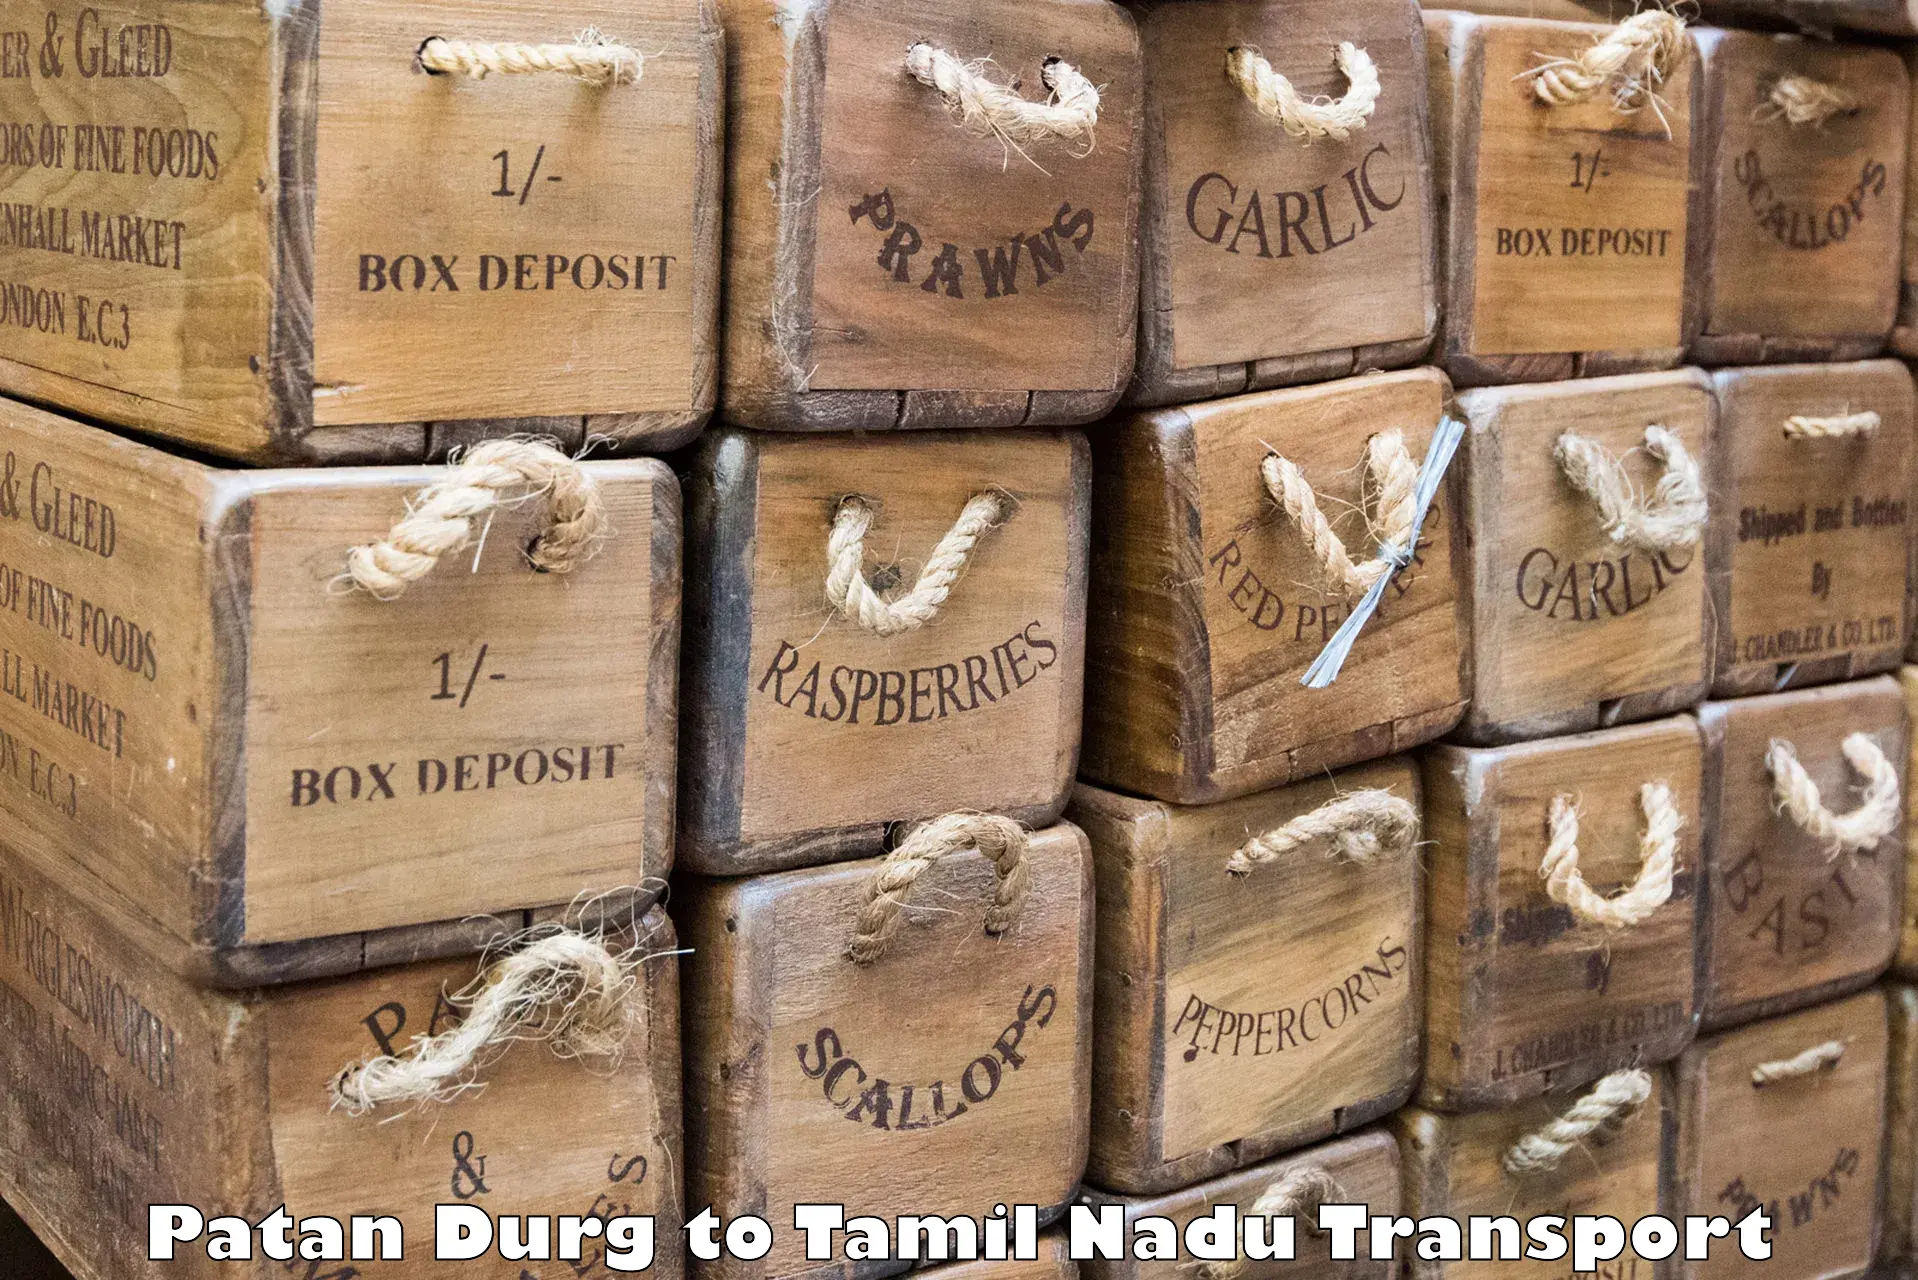 Container transport service Patan Durg to Ariyalur